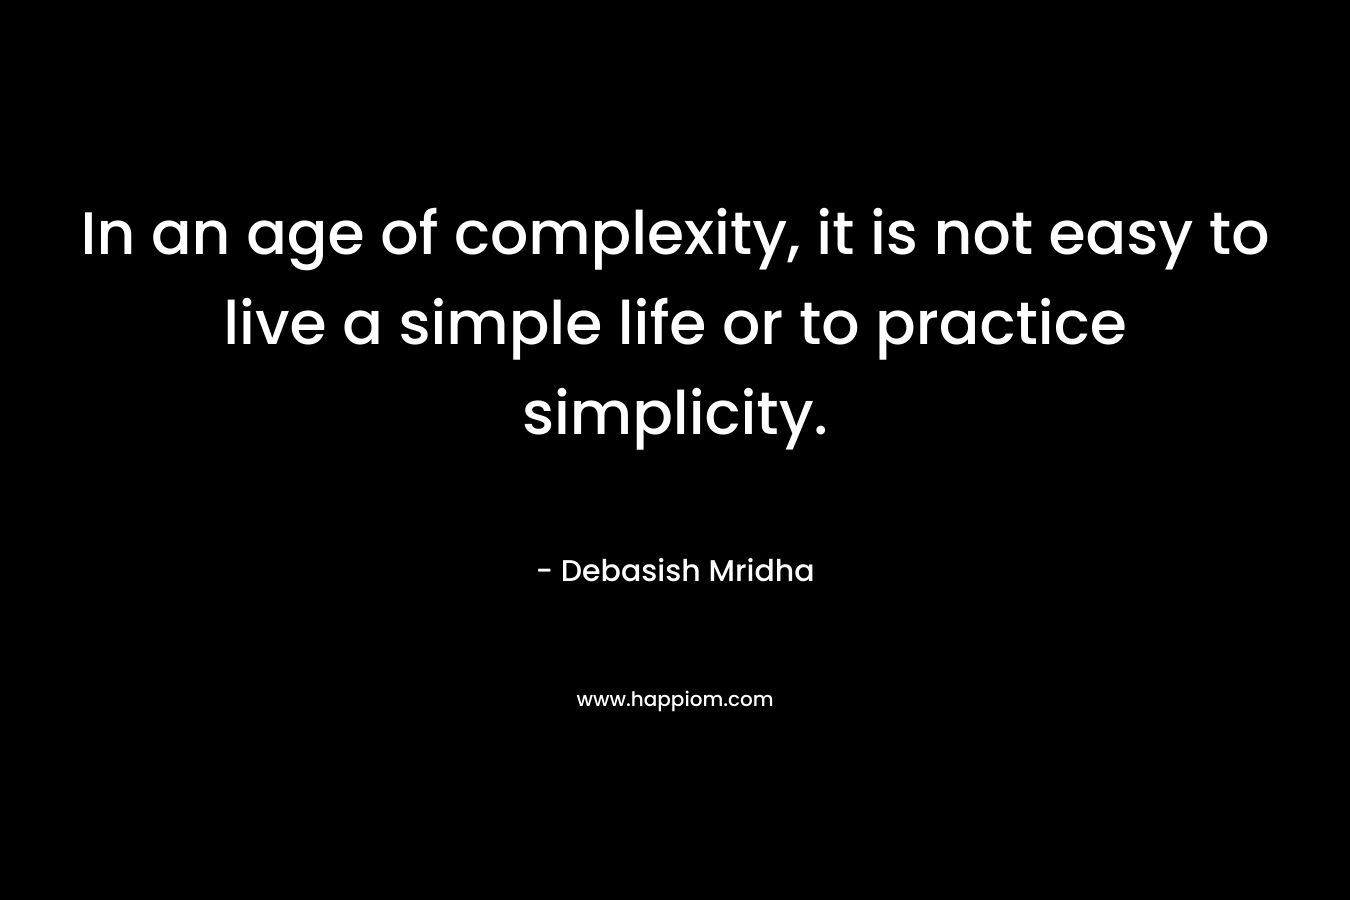 In an age of complexity, it is not easy to live a simple life or to practice simplicity.